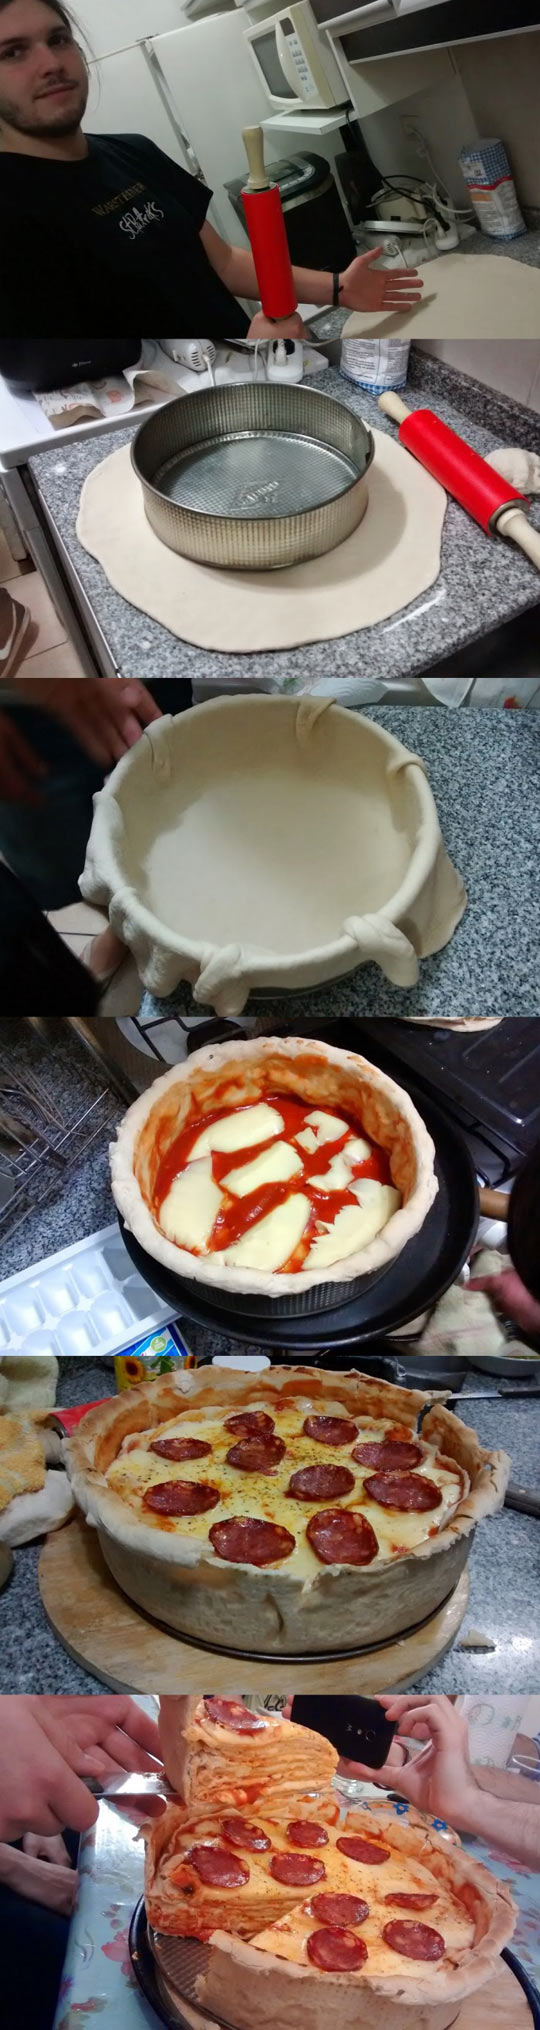 These Guys Made A Pizza Cake